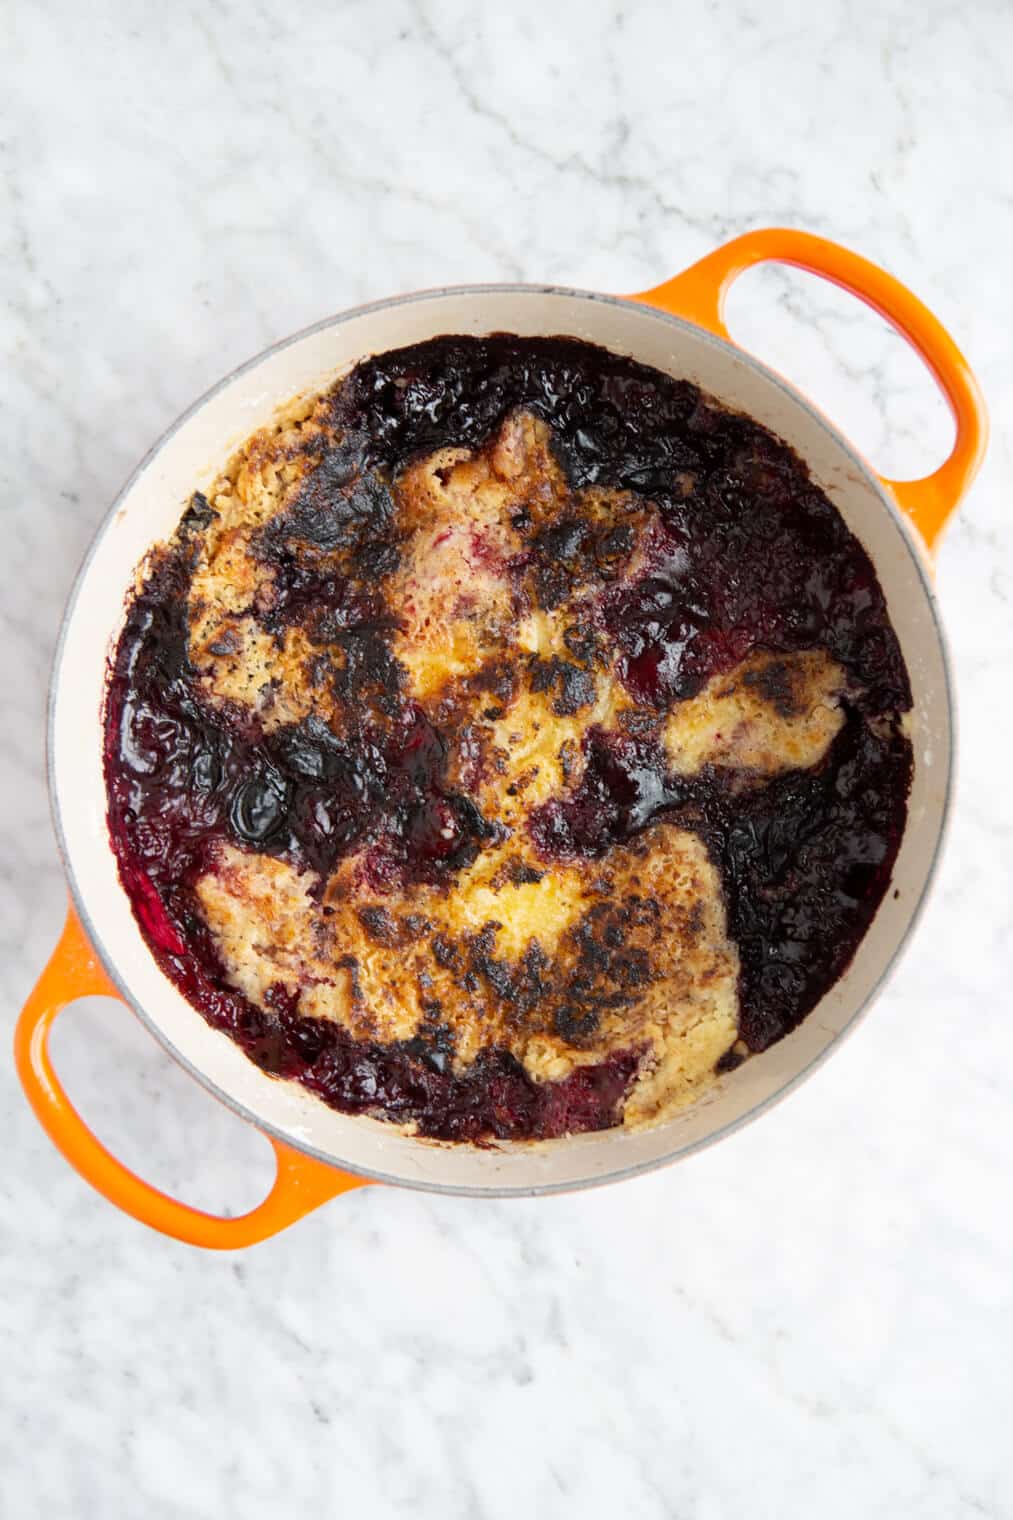 Baked triple berry dump cake in a dutch oven with orange handles on a grey and white marble surface.